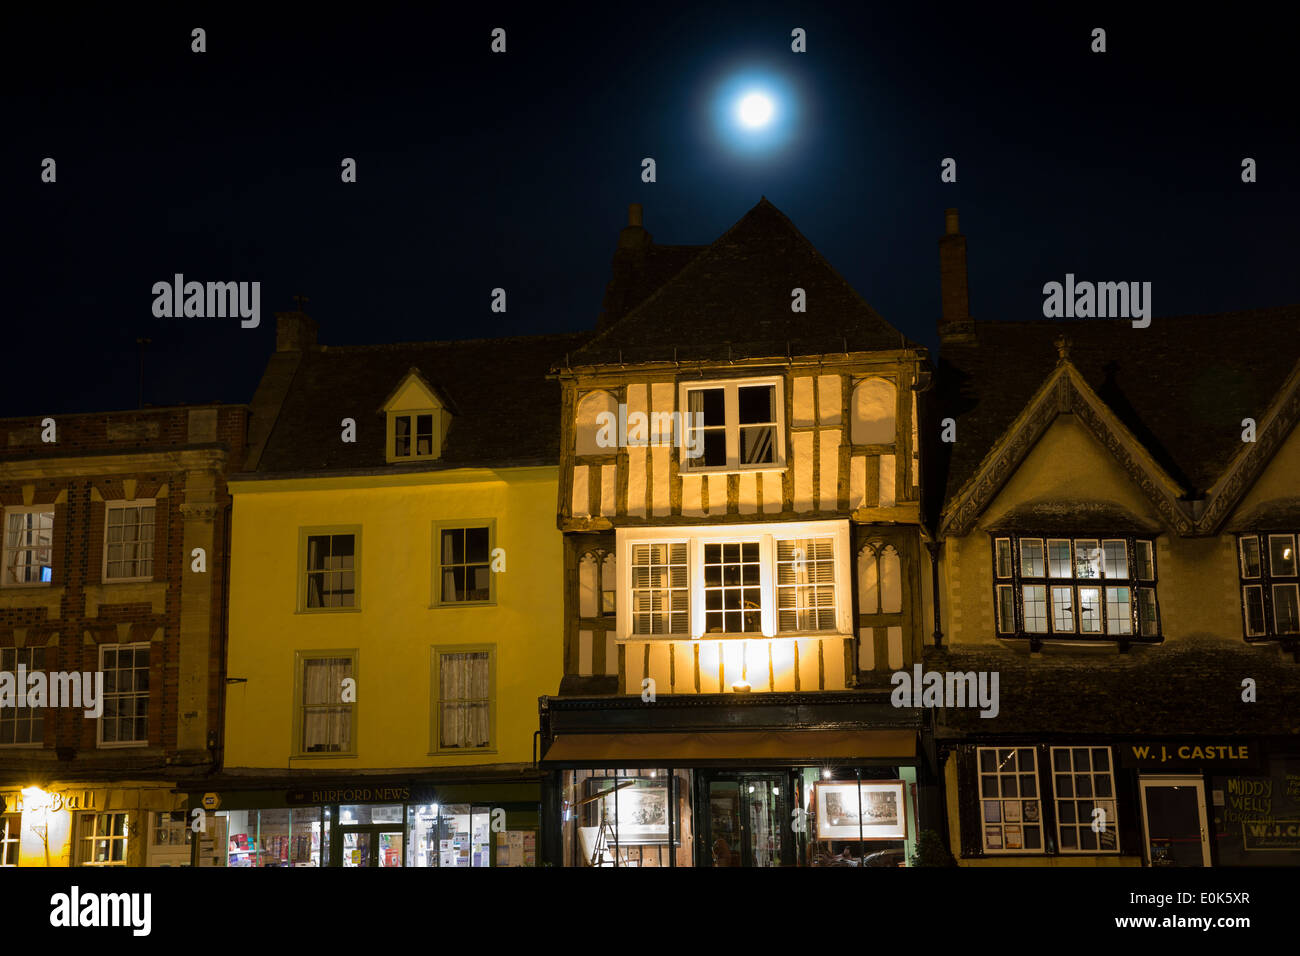 Full moon shining on Medieval architecture along Burford High Street at night, The Cotswolds Stock Photo